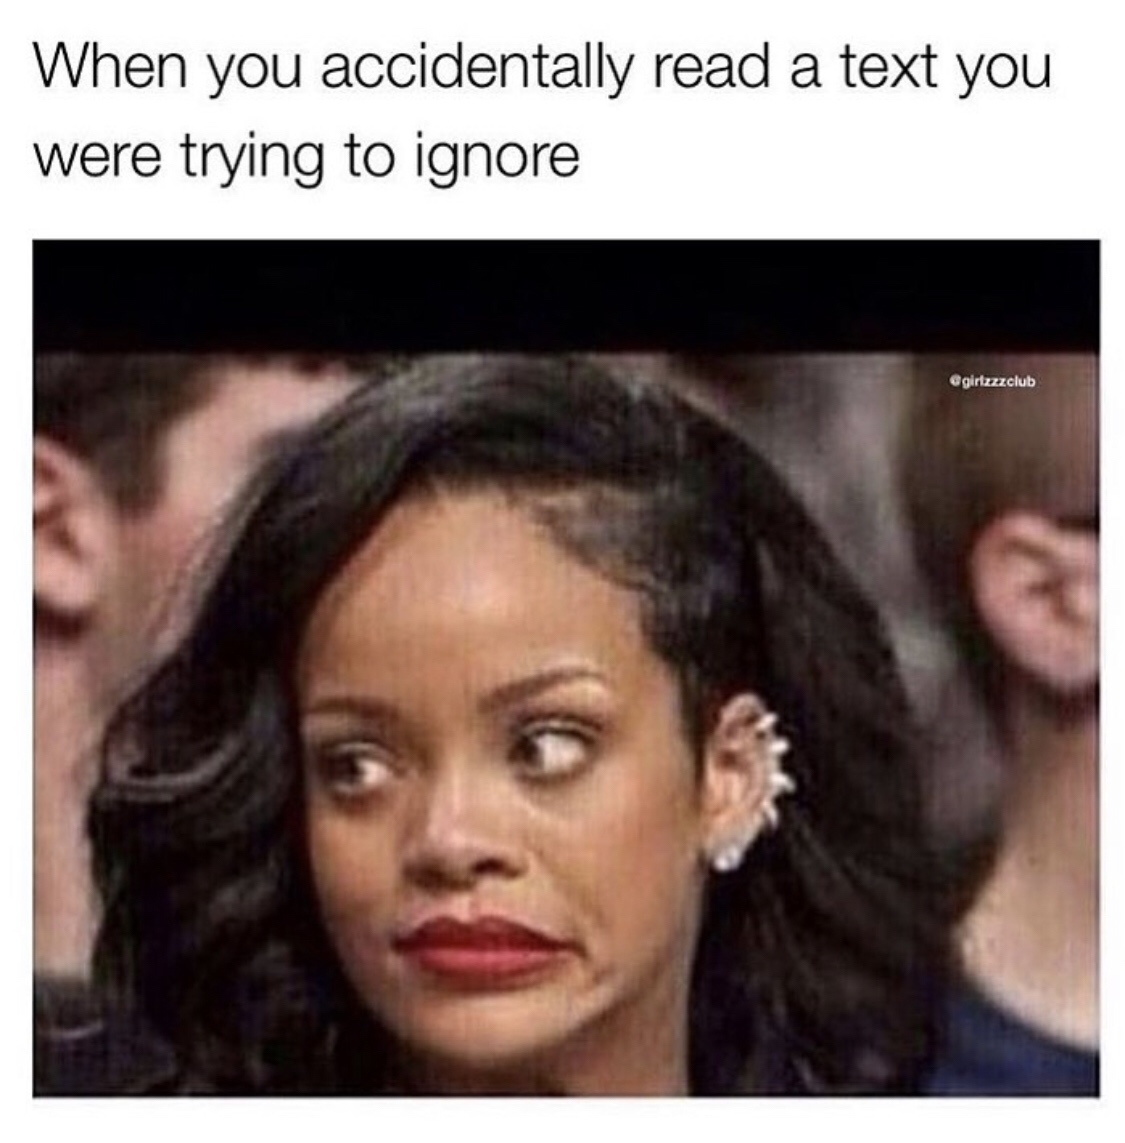 accidentally read a text meme - When you accidentally read a text you were trying to ignore